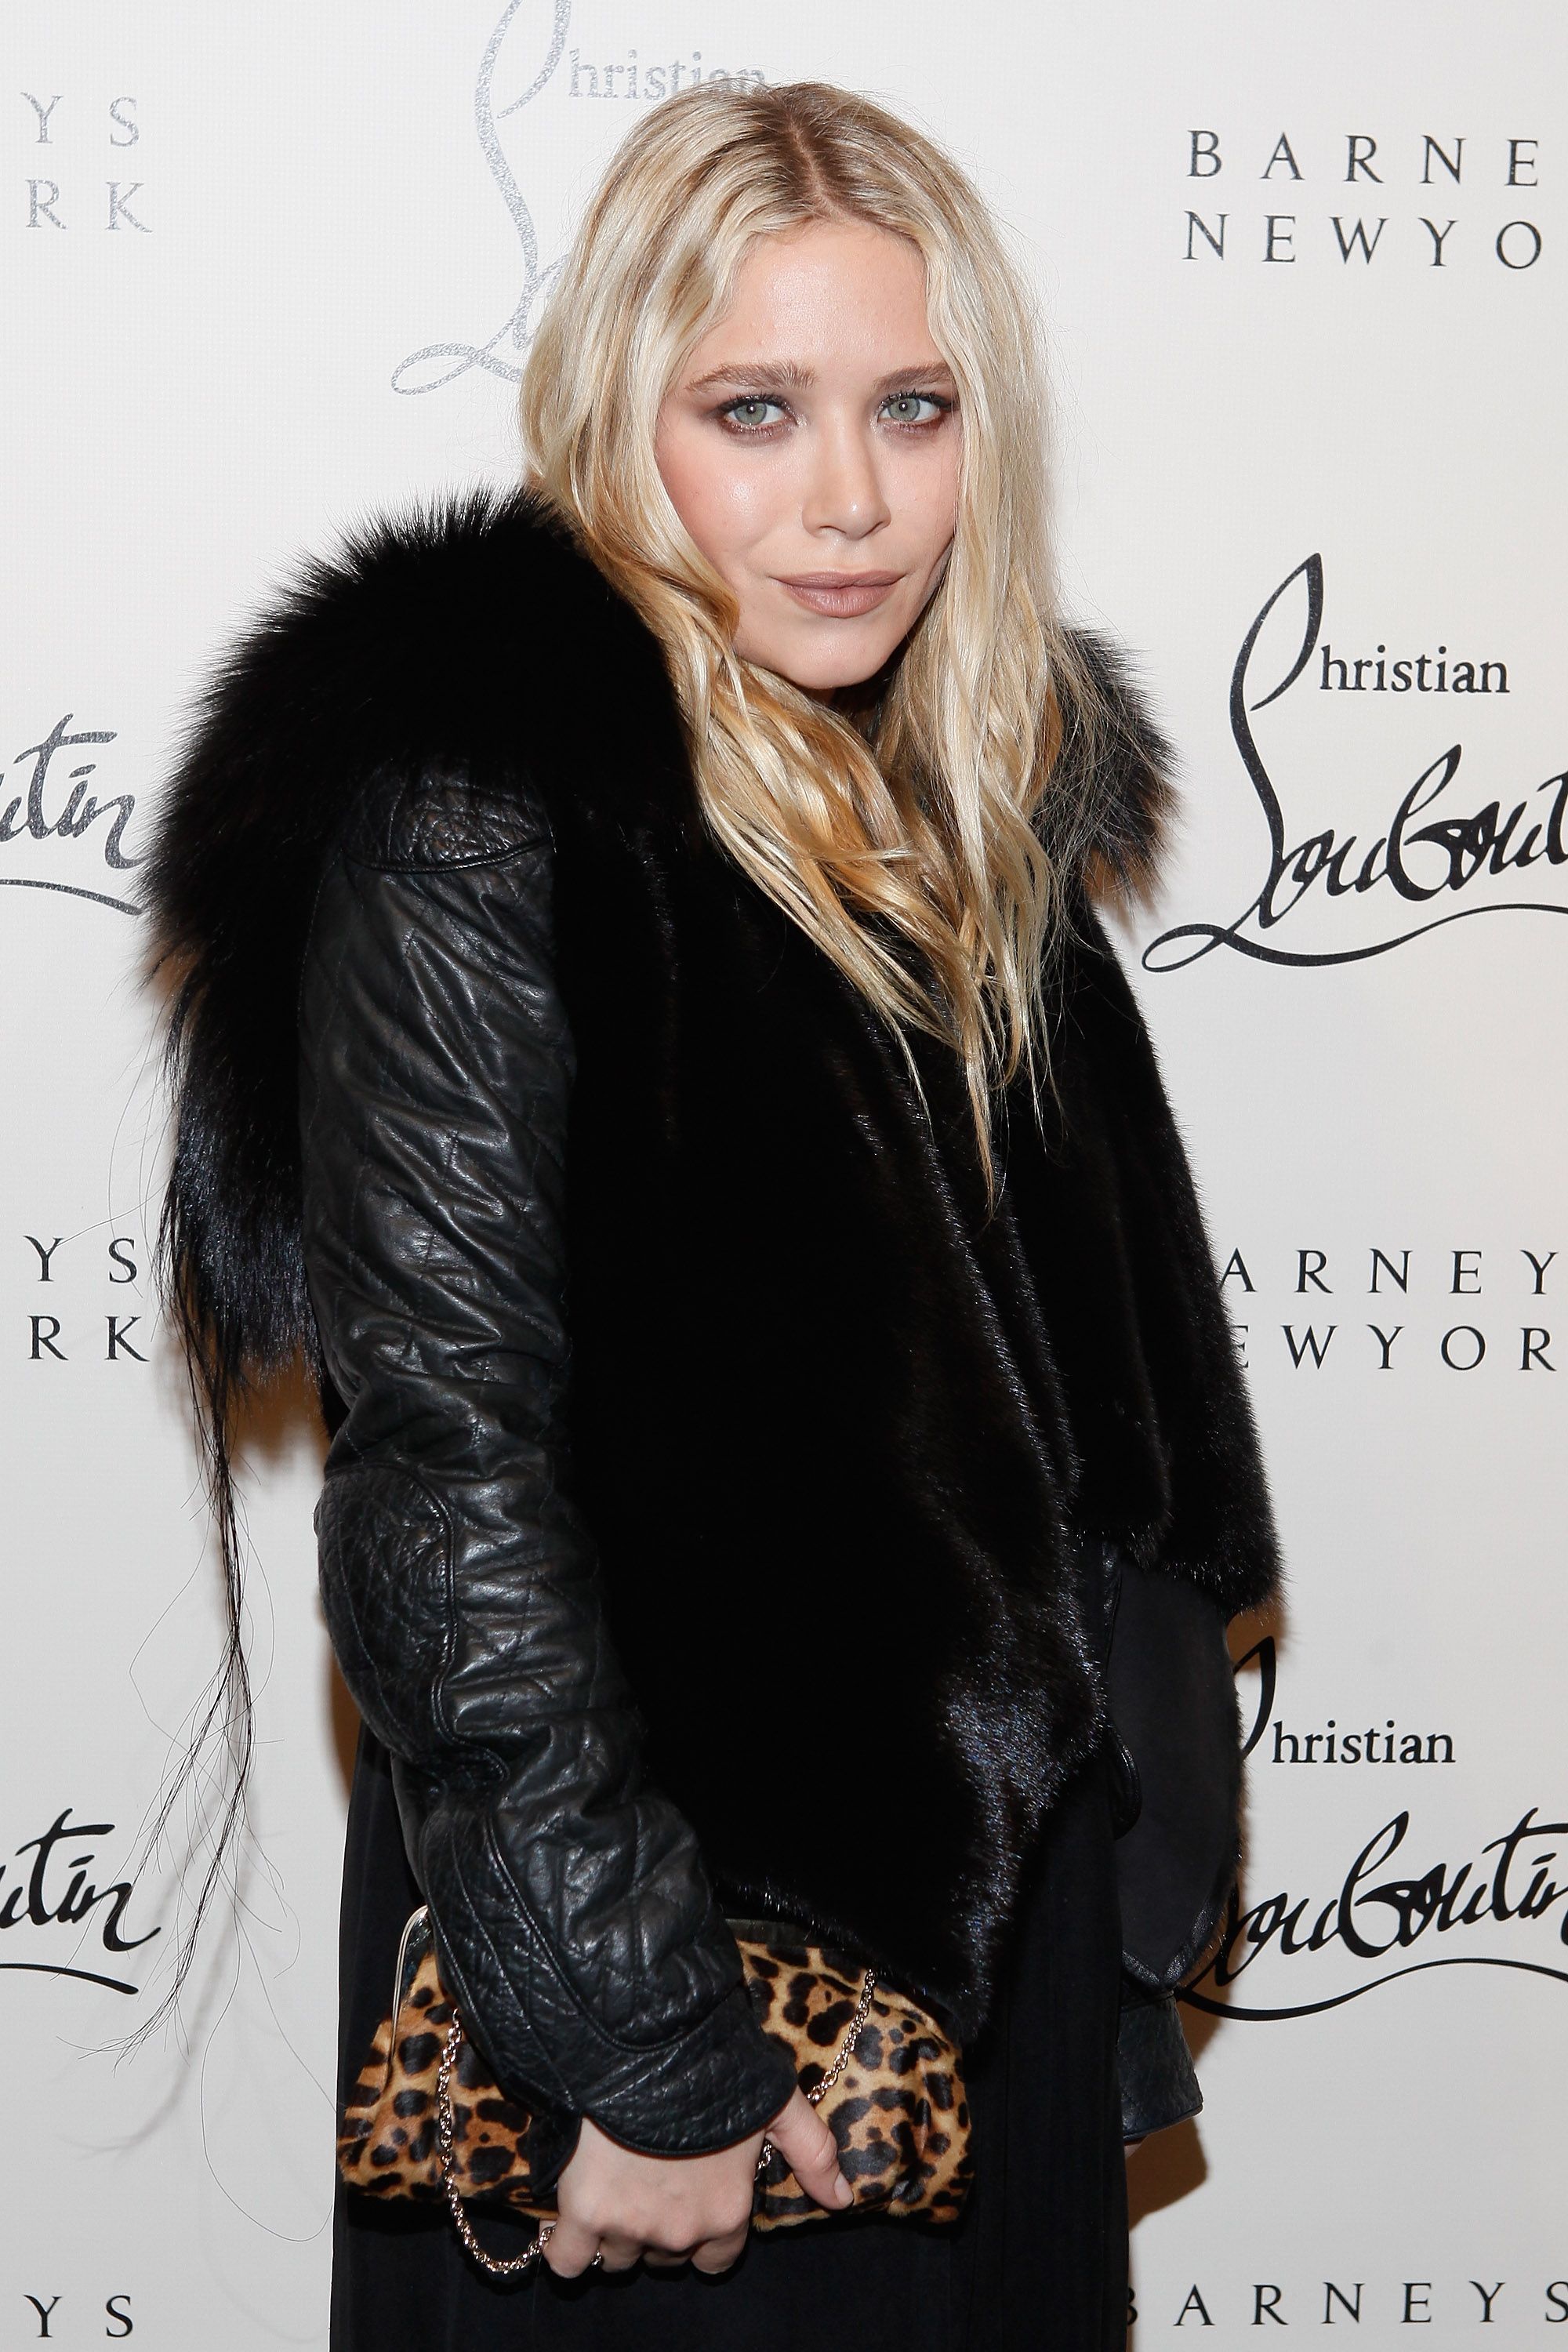 Mary-Kate Olsen during the Christian attends the Louboutin Cocktail party at Barneys New York on November 1, 2011 in New York City. | Source: Getty Images